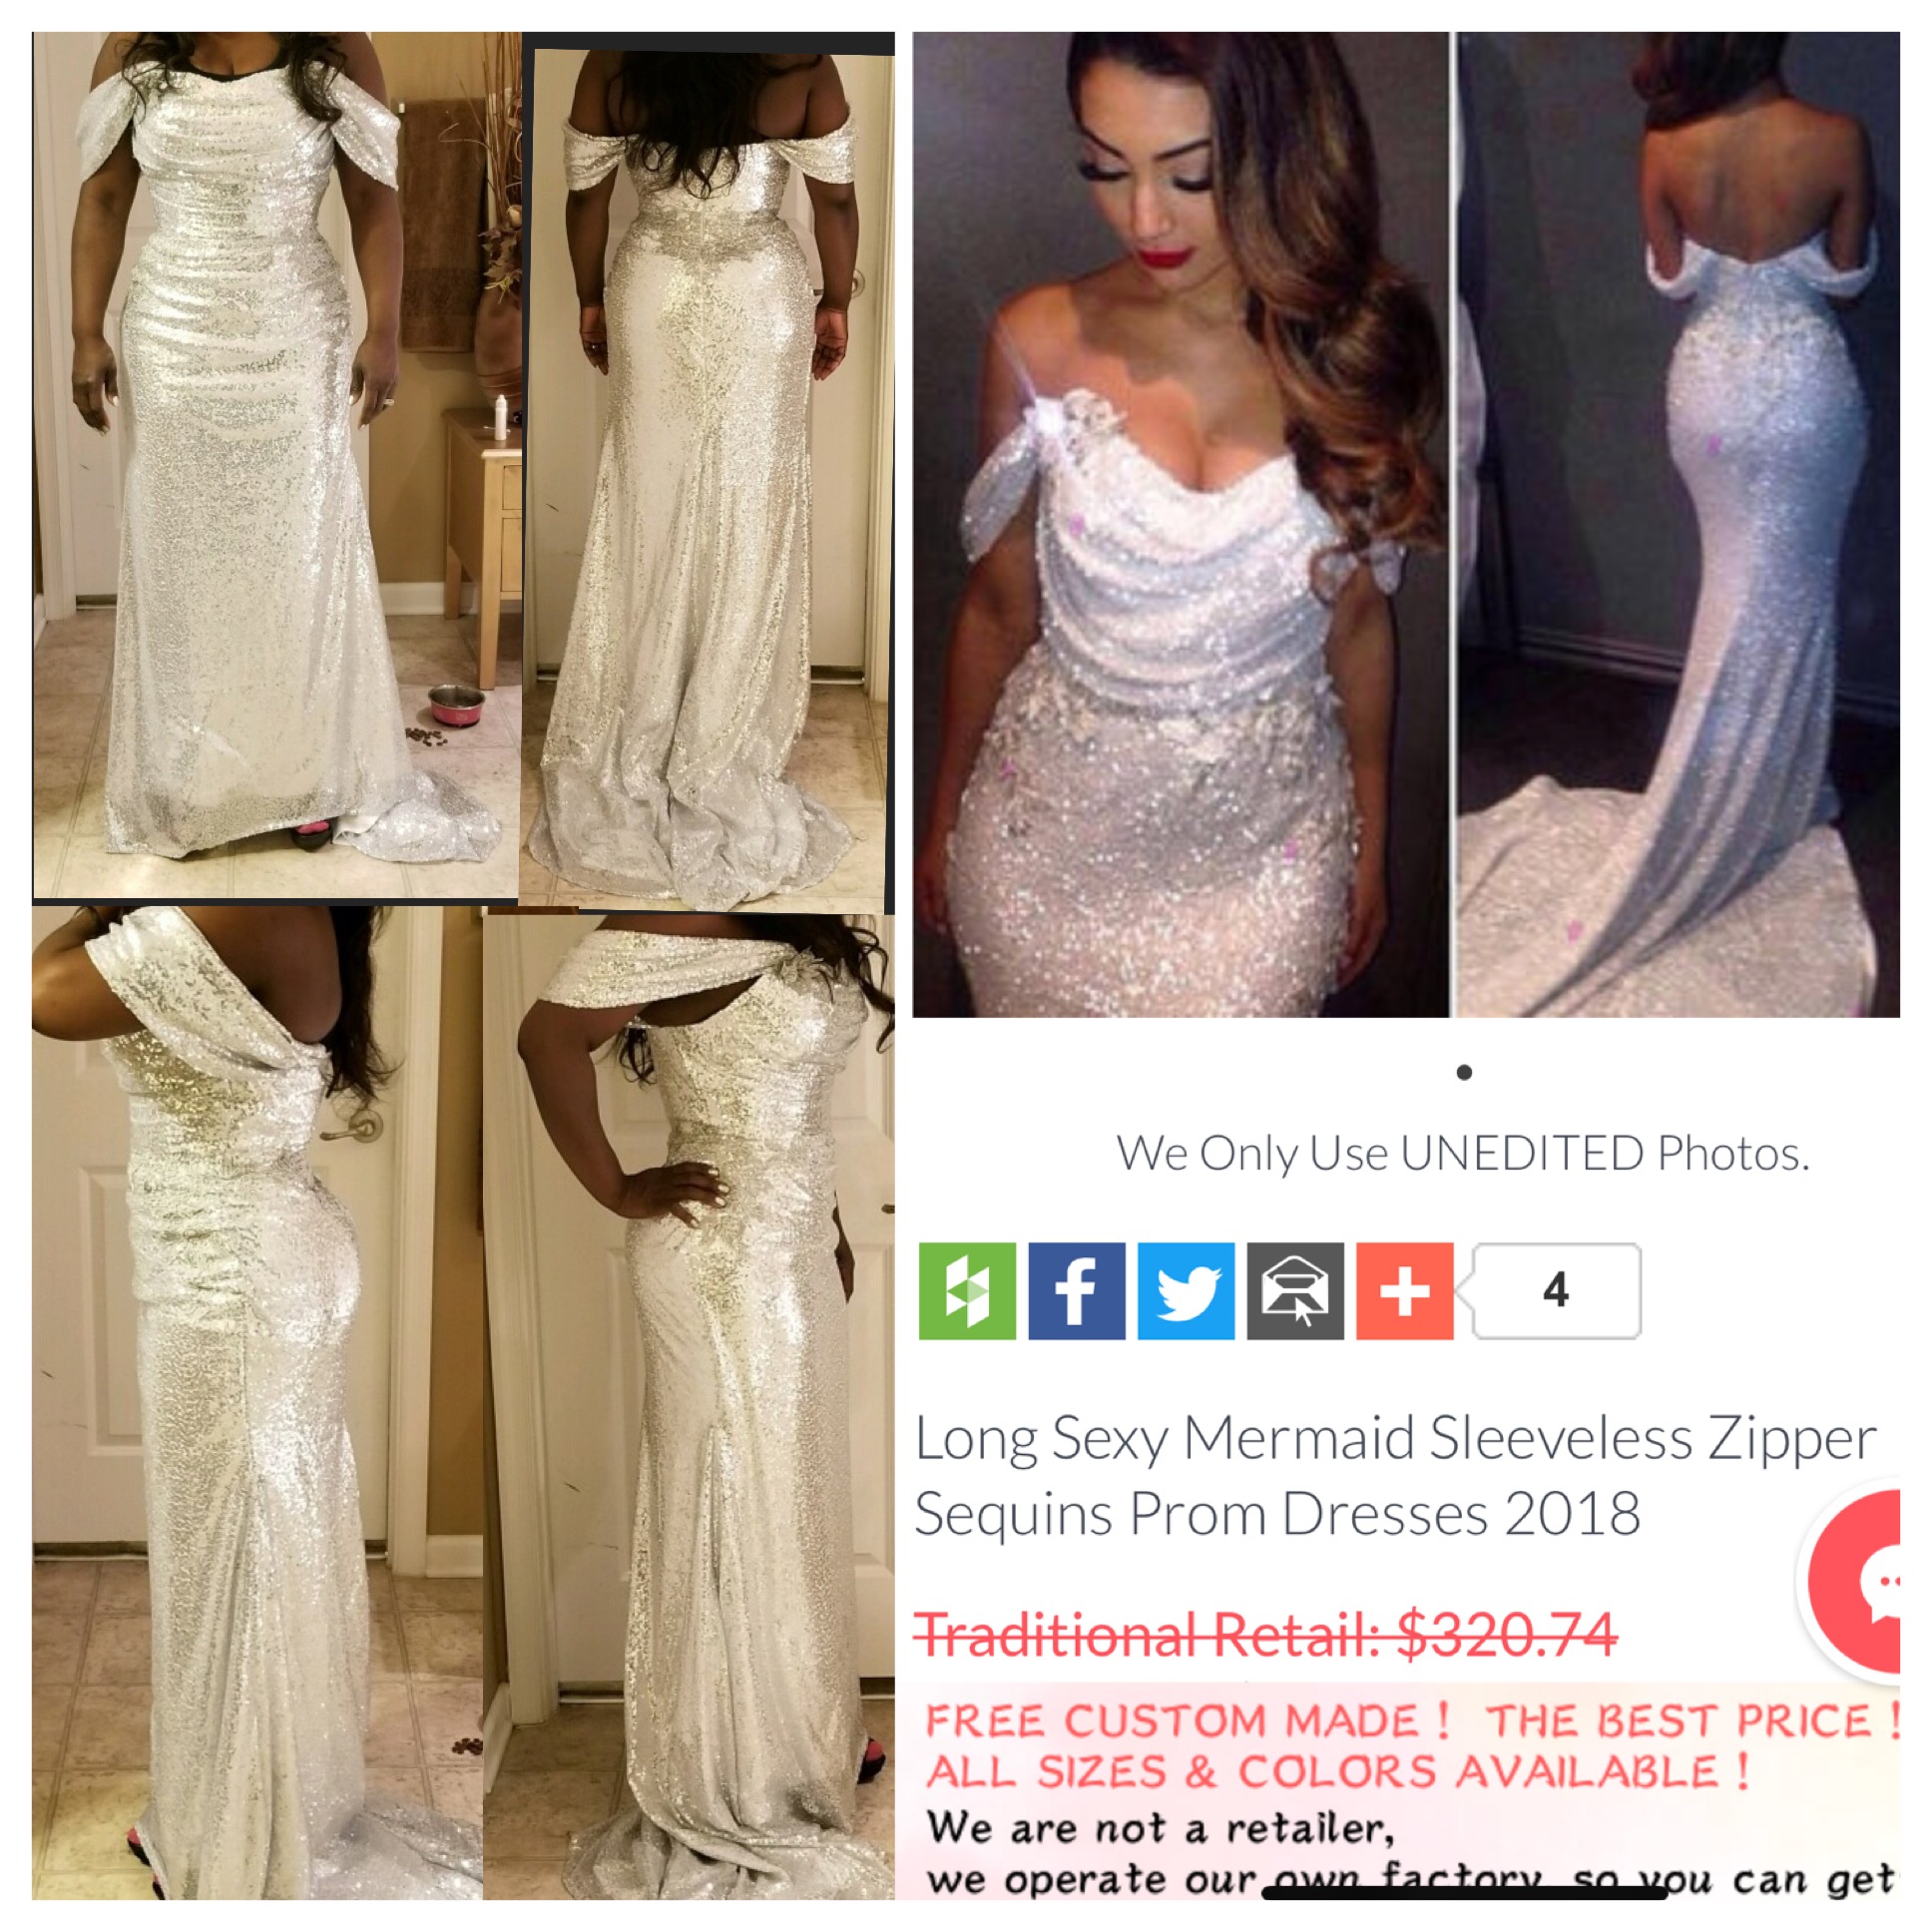 LoliPromDress Reviews - 20 Reviews of 